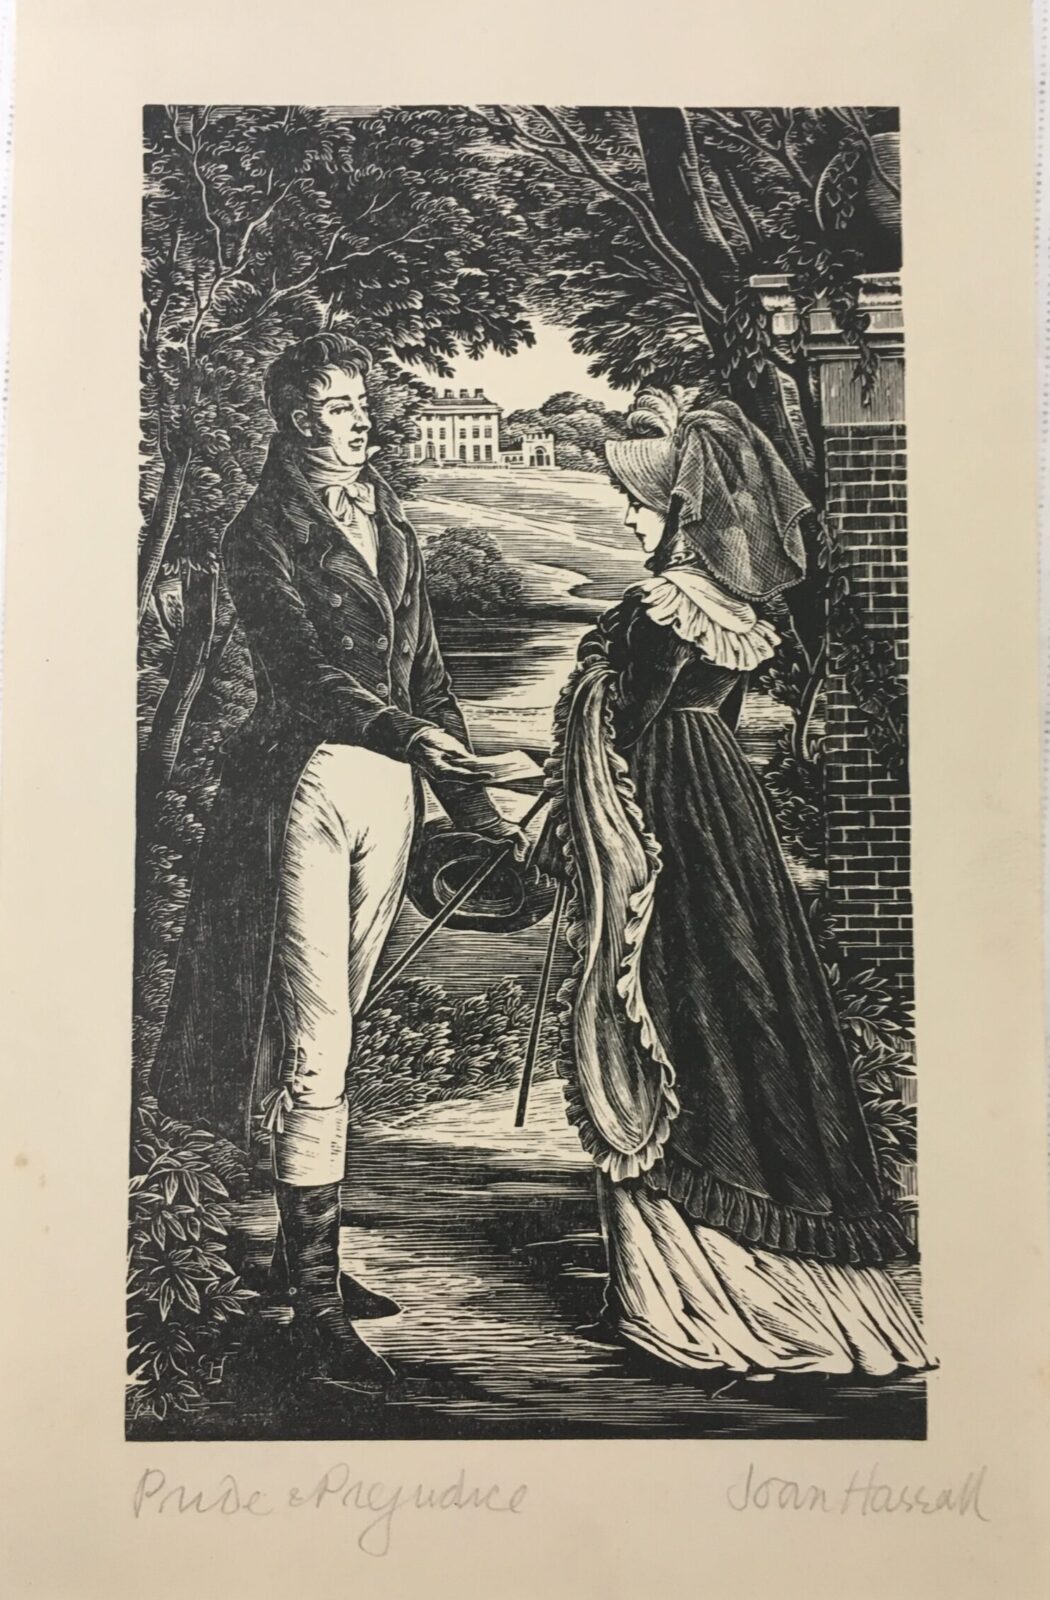 Wood engraving illustrations for Pride and Prejudice, by Joan Hassell, 1957. The scene shown is Darcy handing Elizabeth his letter, at Rosings Park.